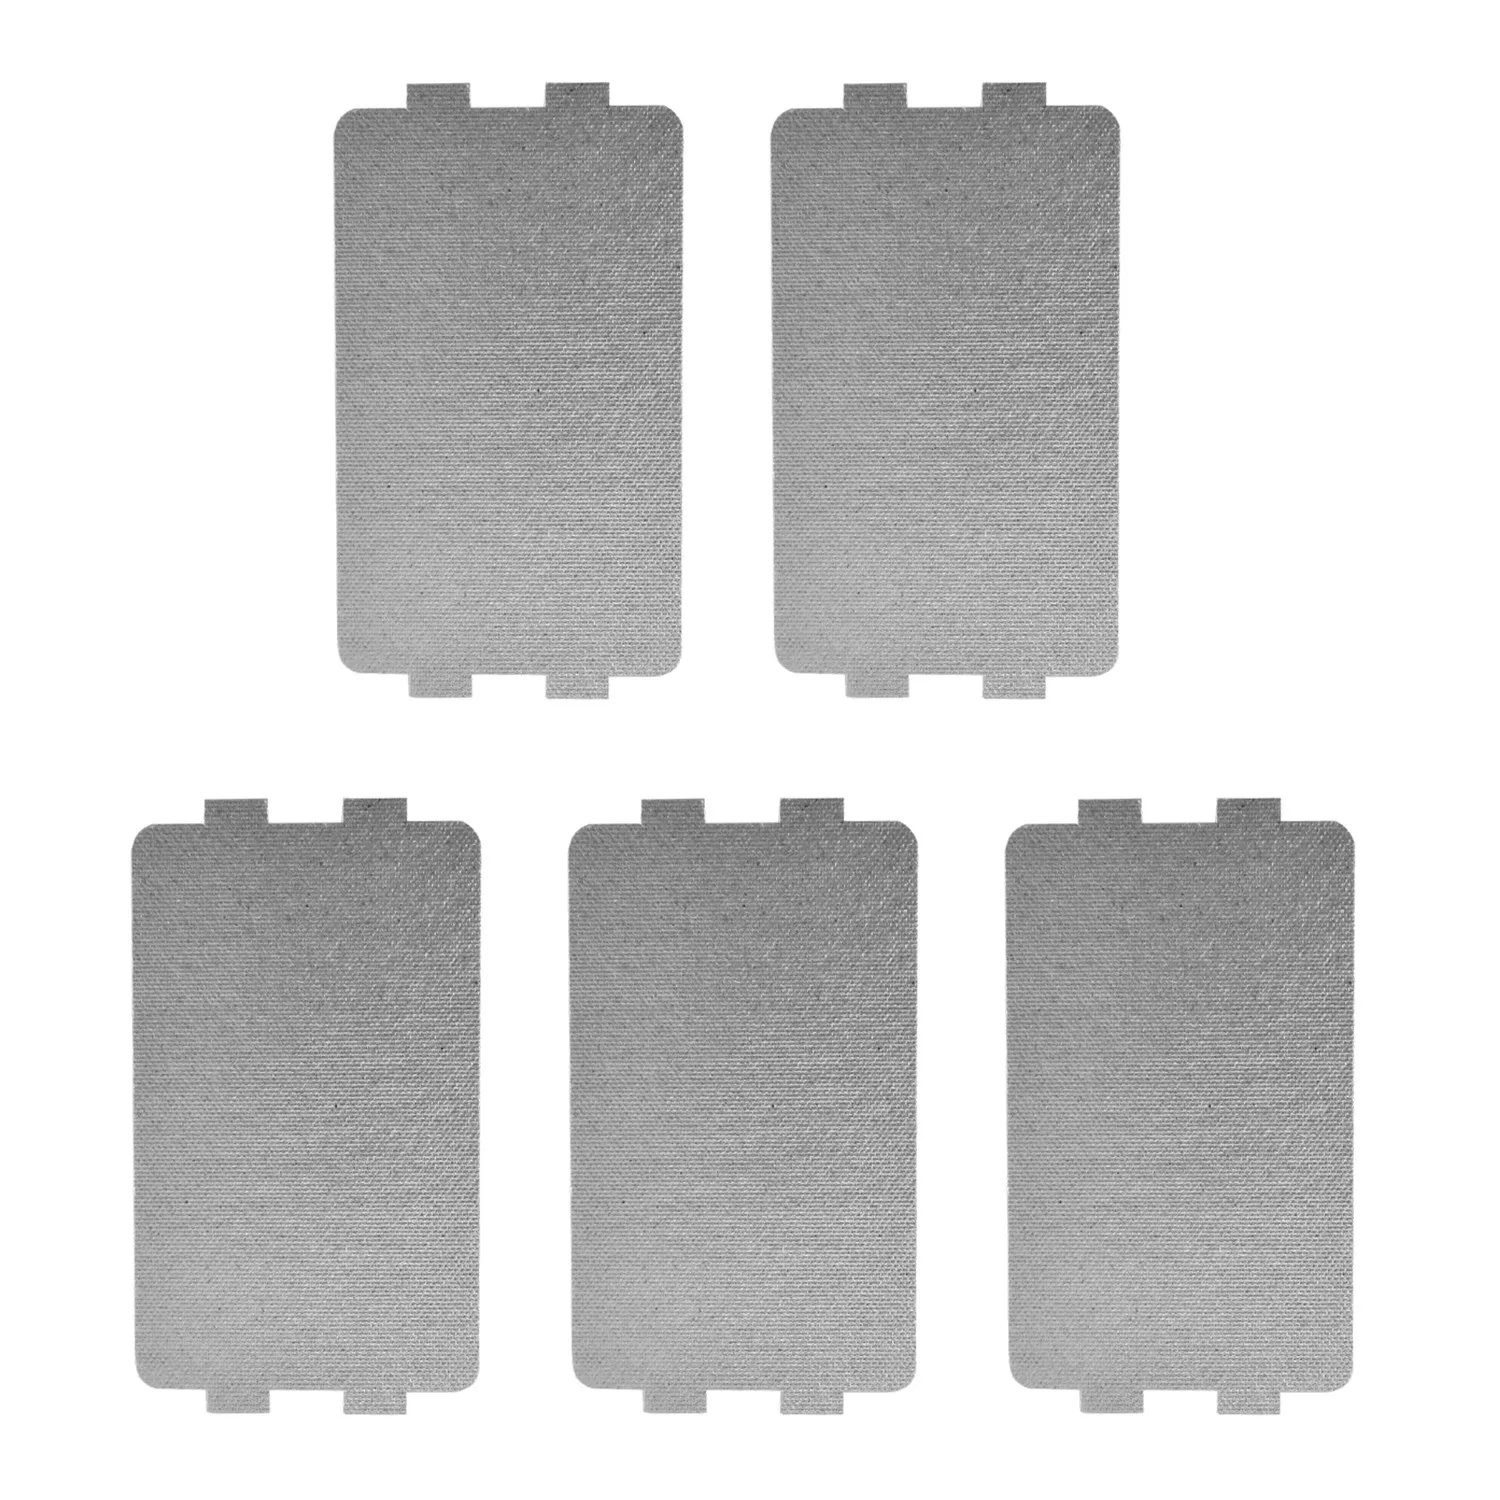 

5pcs Universal Microwave Oven Mica Sheet Wave Guide Waveguide Cover Sheet Plates Suitable For Electric Hair-dryer Toaster Warmer